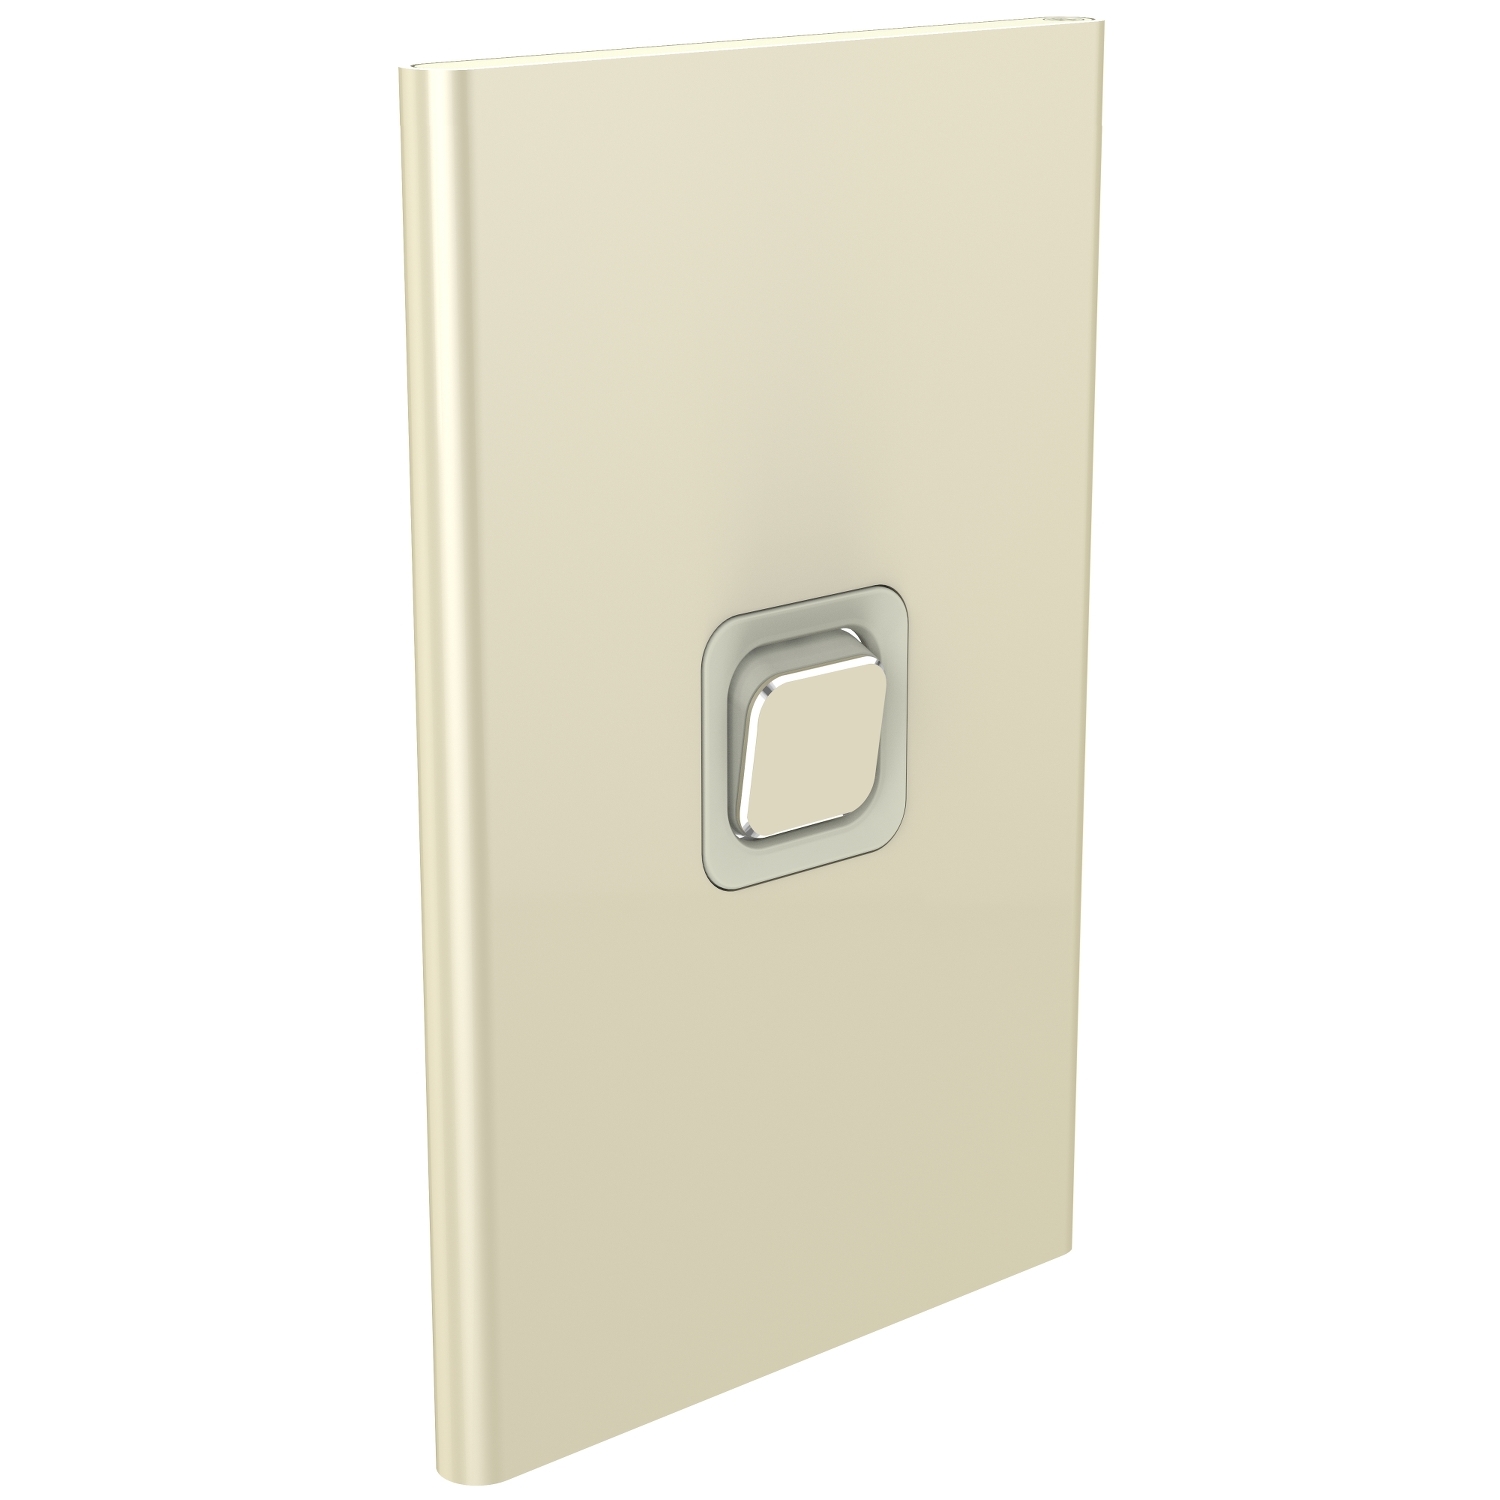 PDLS381C-CE - PDL Iconic Styl, cover frame, 1 switch, vertical - Crowne